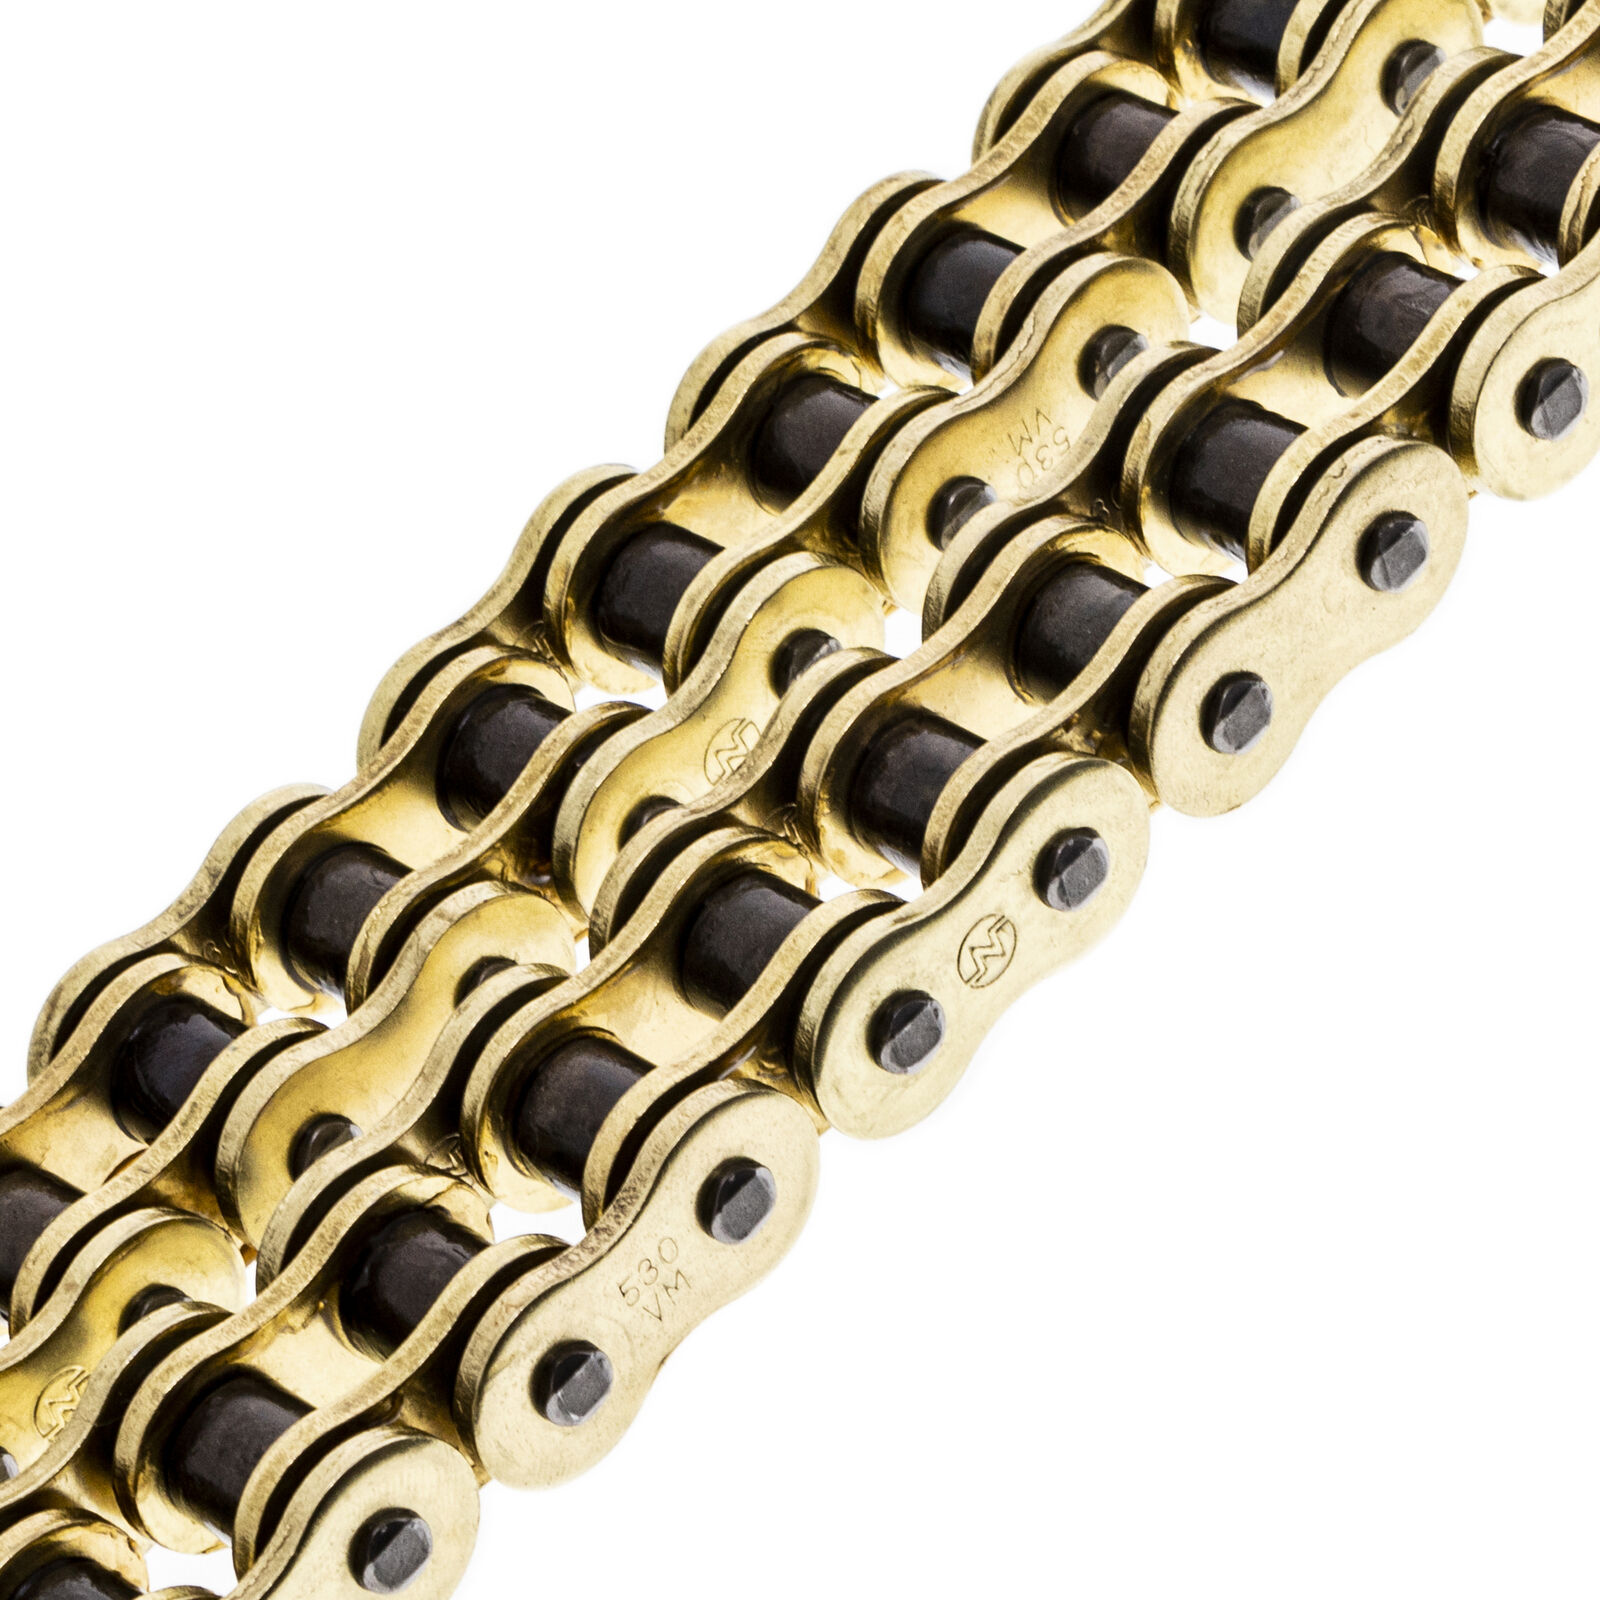 NICHE Gold 530 X-Ring Chain 120 Links With Connecting Master Link Motorcycle